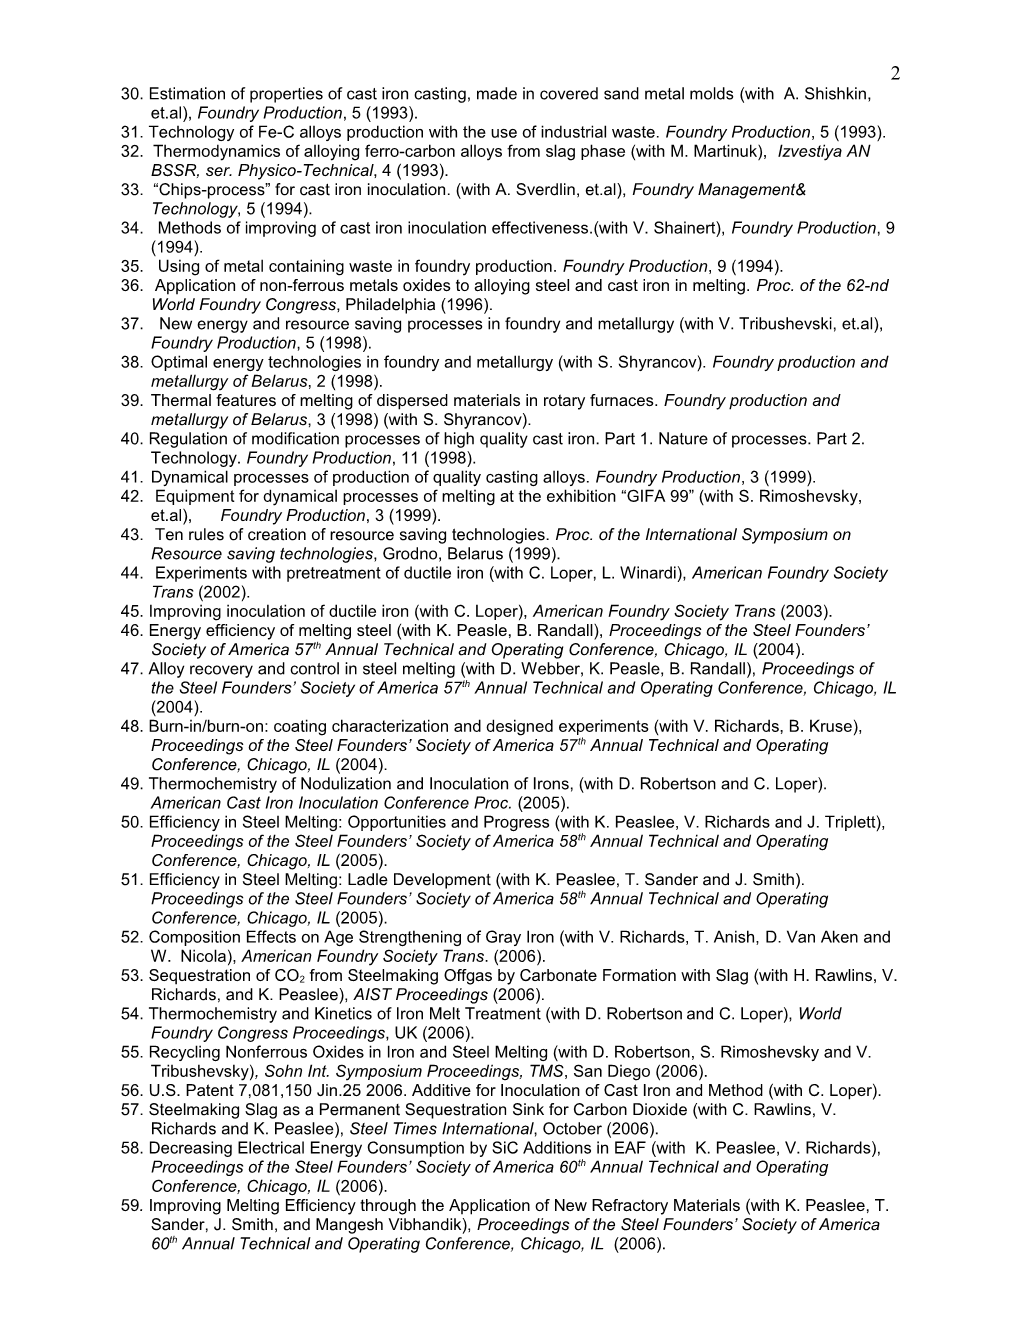 List of the Main Publications